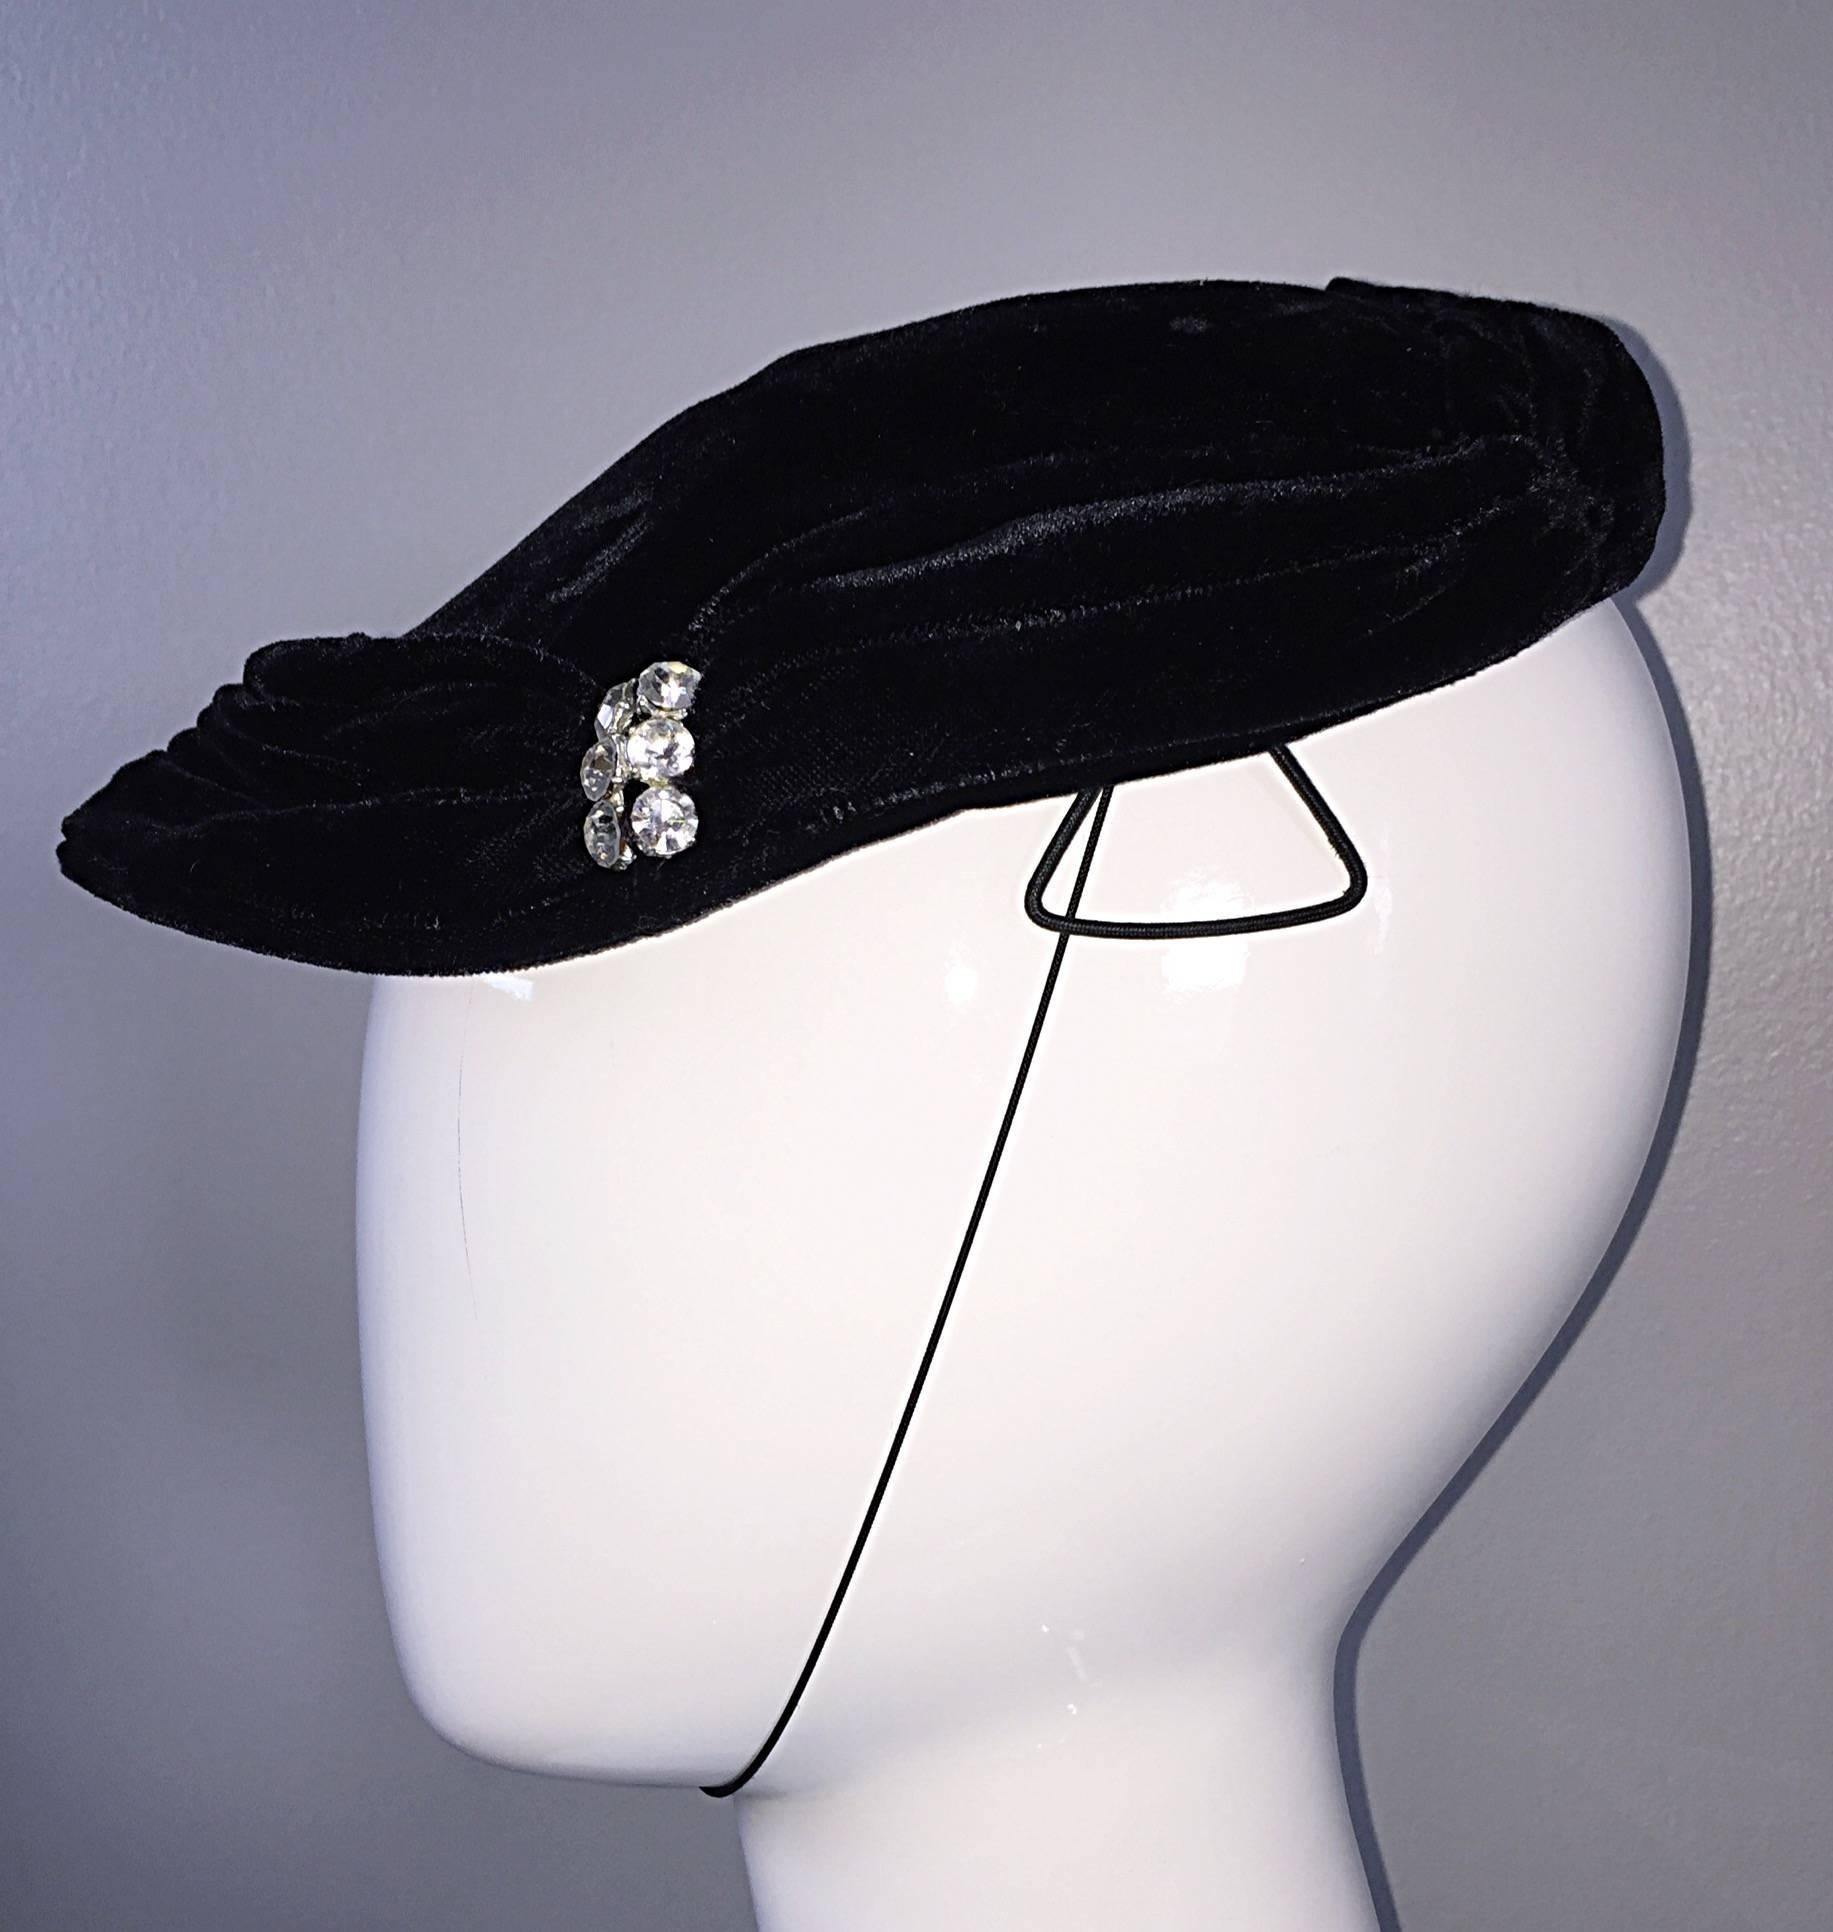 Beautiful 40s vintage black silk velvet hat! Features rhinestones at each front side, with intricate pleating. Chin strap, and side clamps ensures the hat stays on the head. In great condition. Will fit most sizes (Small-Medium/Large)